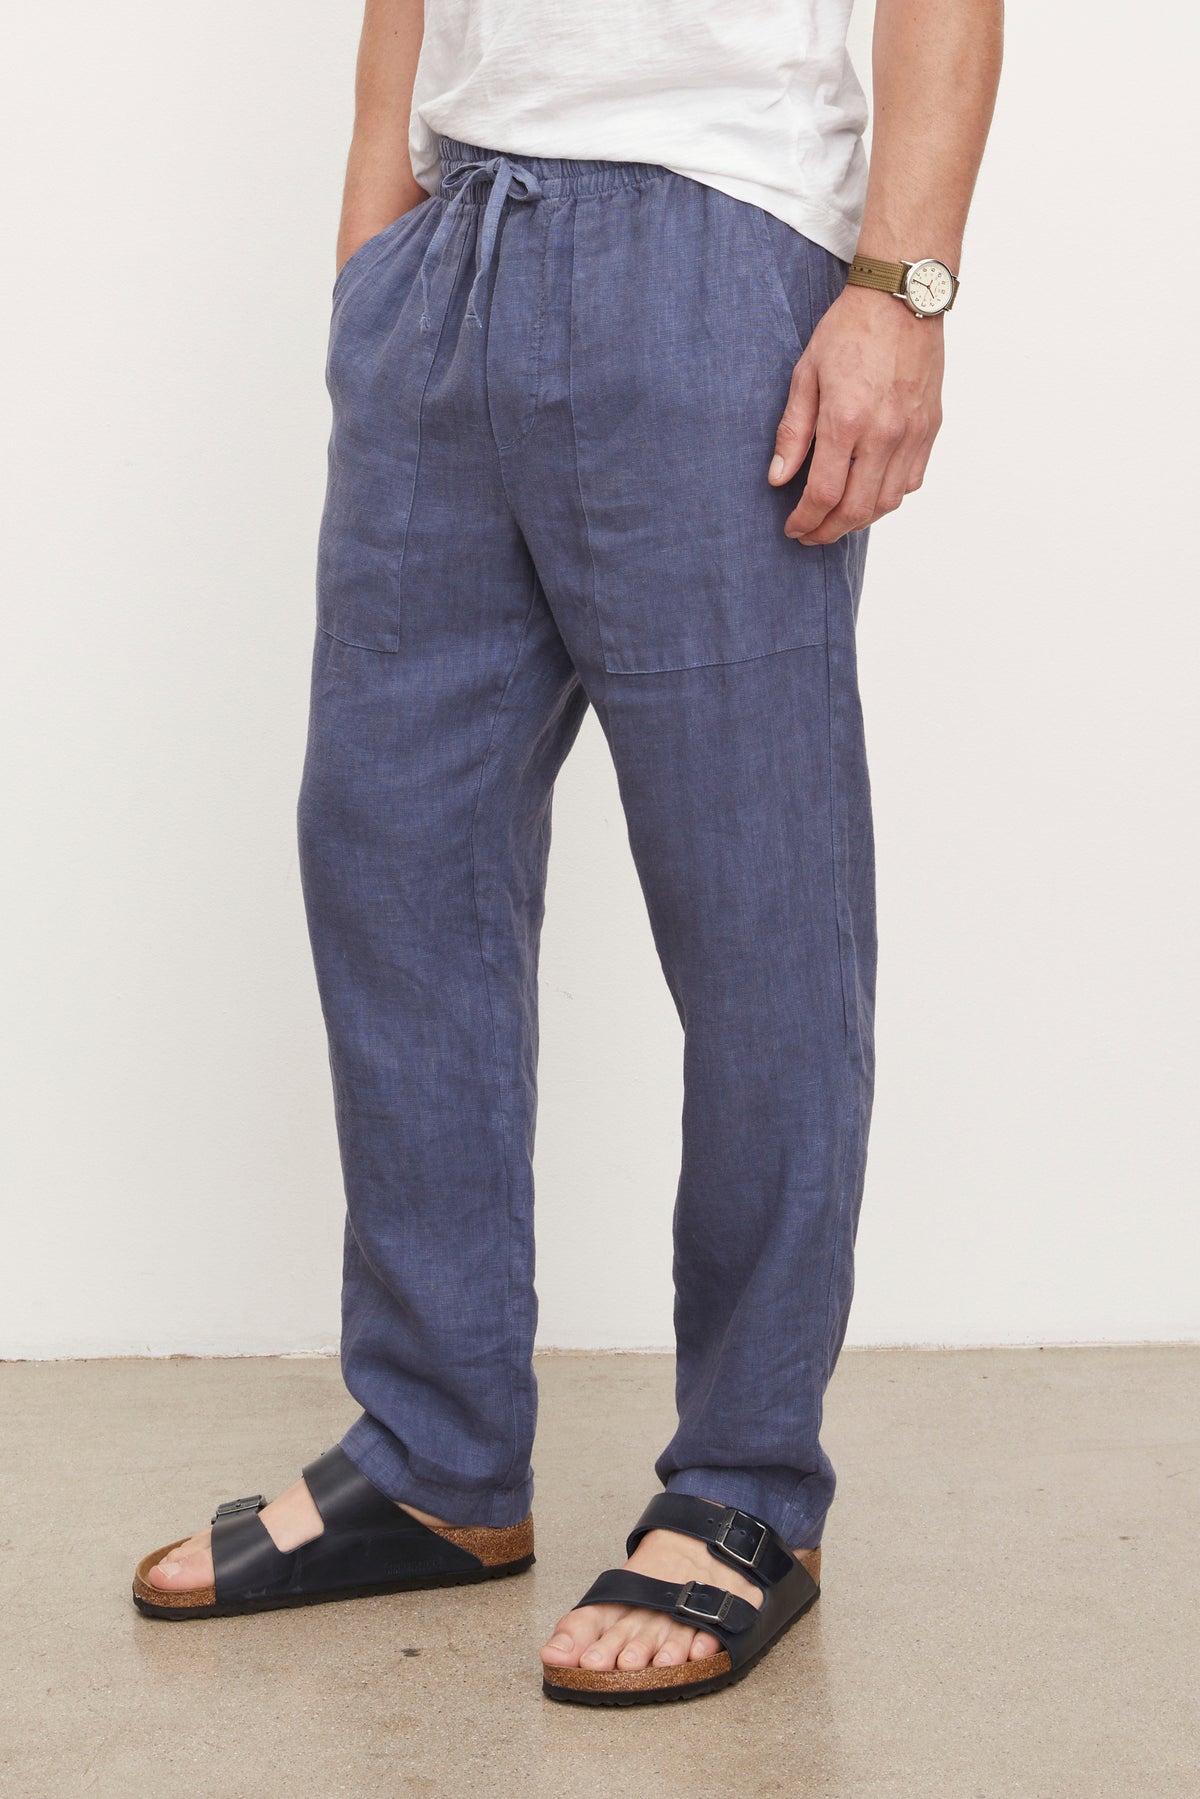 A person wearing blue Velvet by Graham & Spencer Phelan Linen Pants, black sandals, and a silver wristwatch, standing against a plain wall. Visible from the waist down.-36805503418561